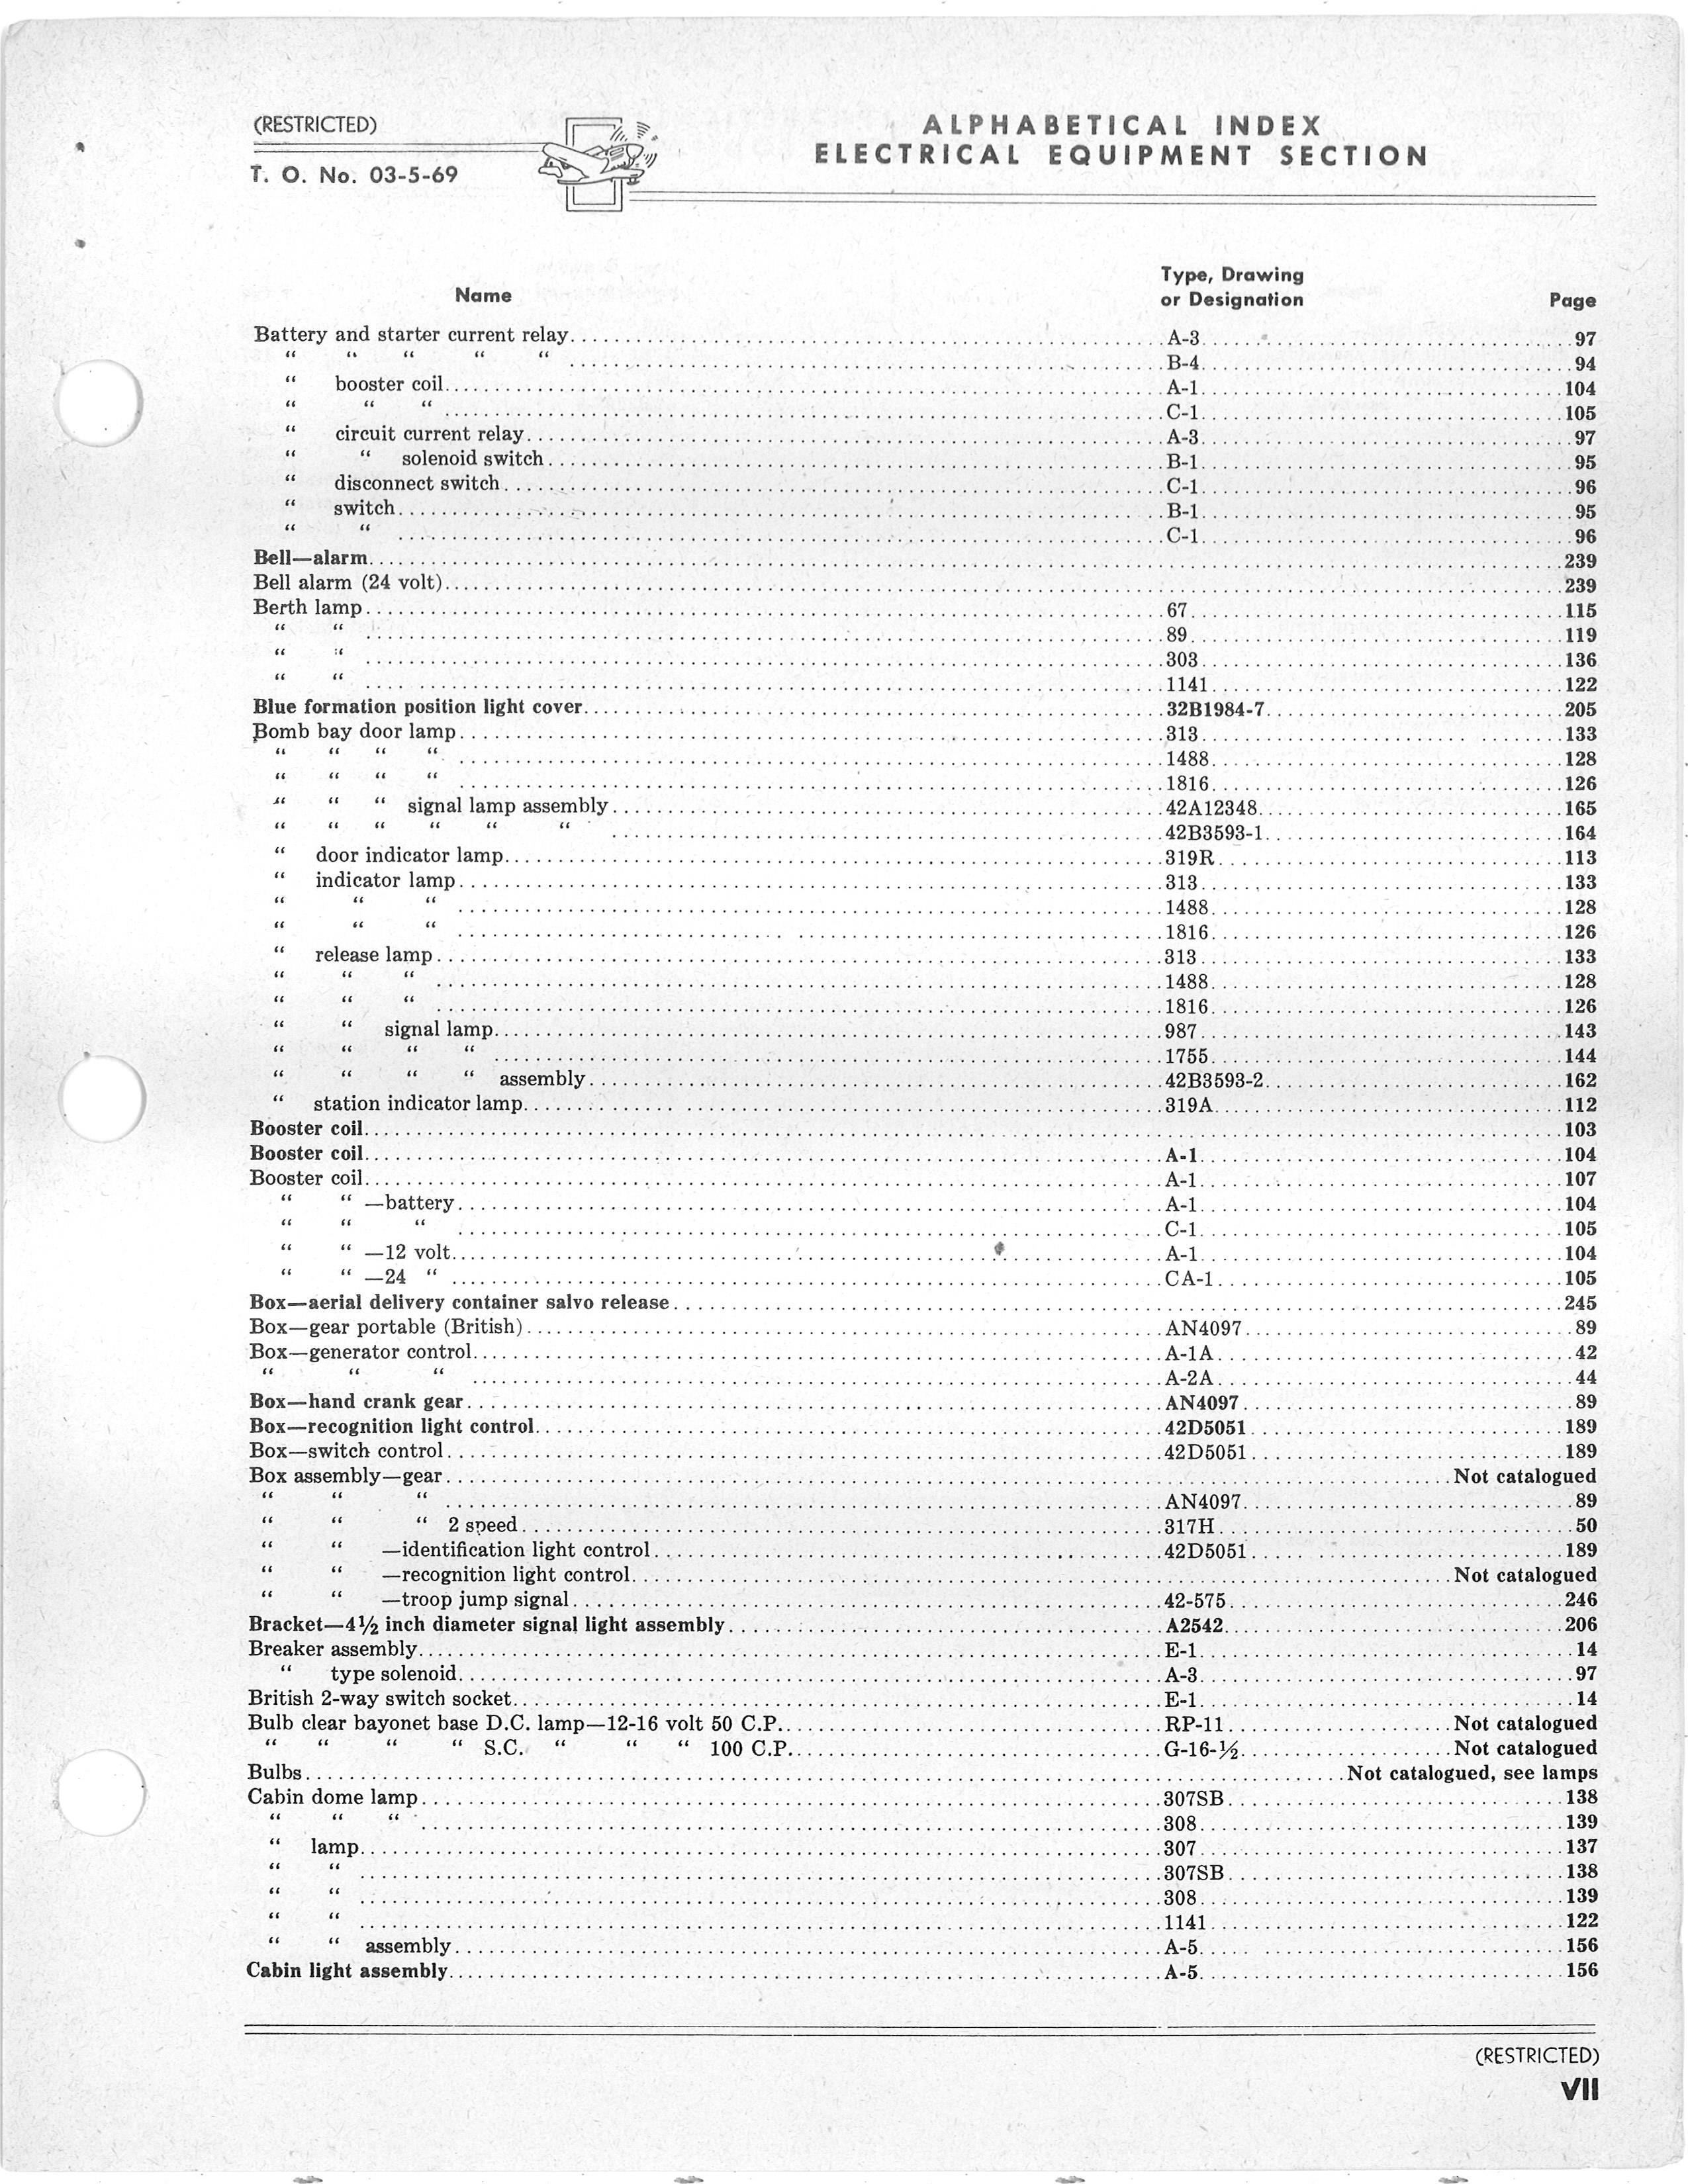 Sample page 9 from AirCorps Library document: Index of Army Navy Electrical, Aeronautical Equipment